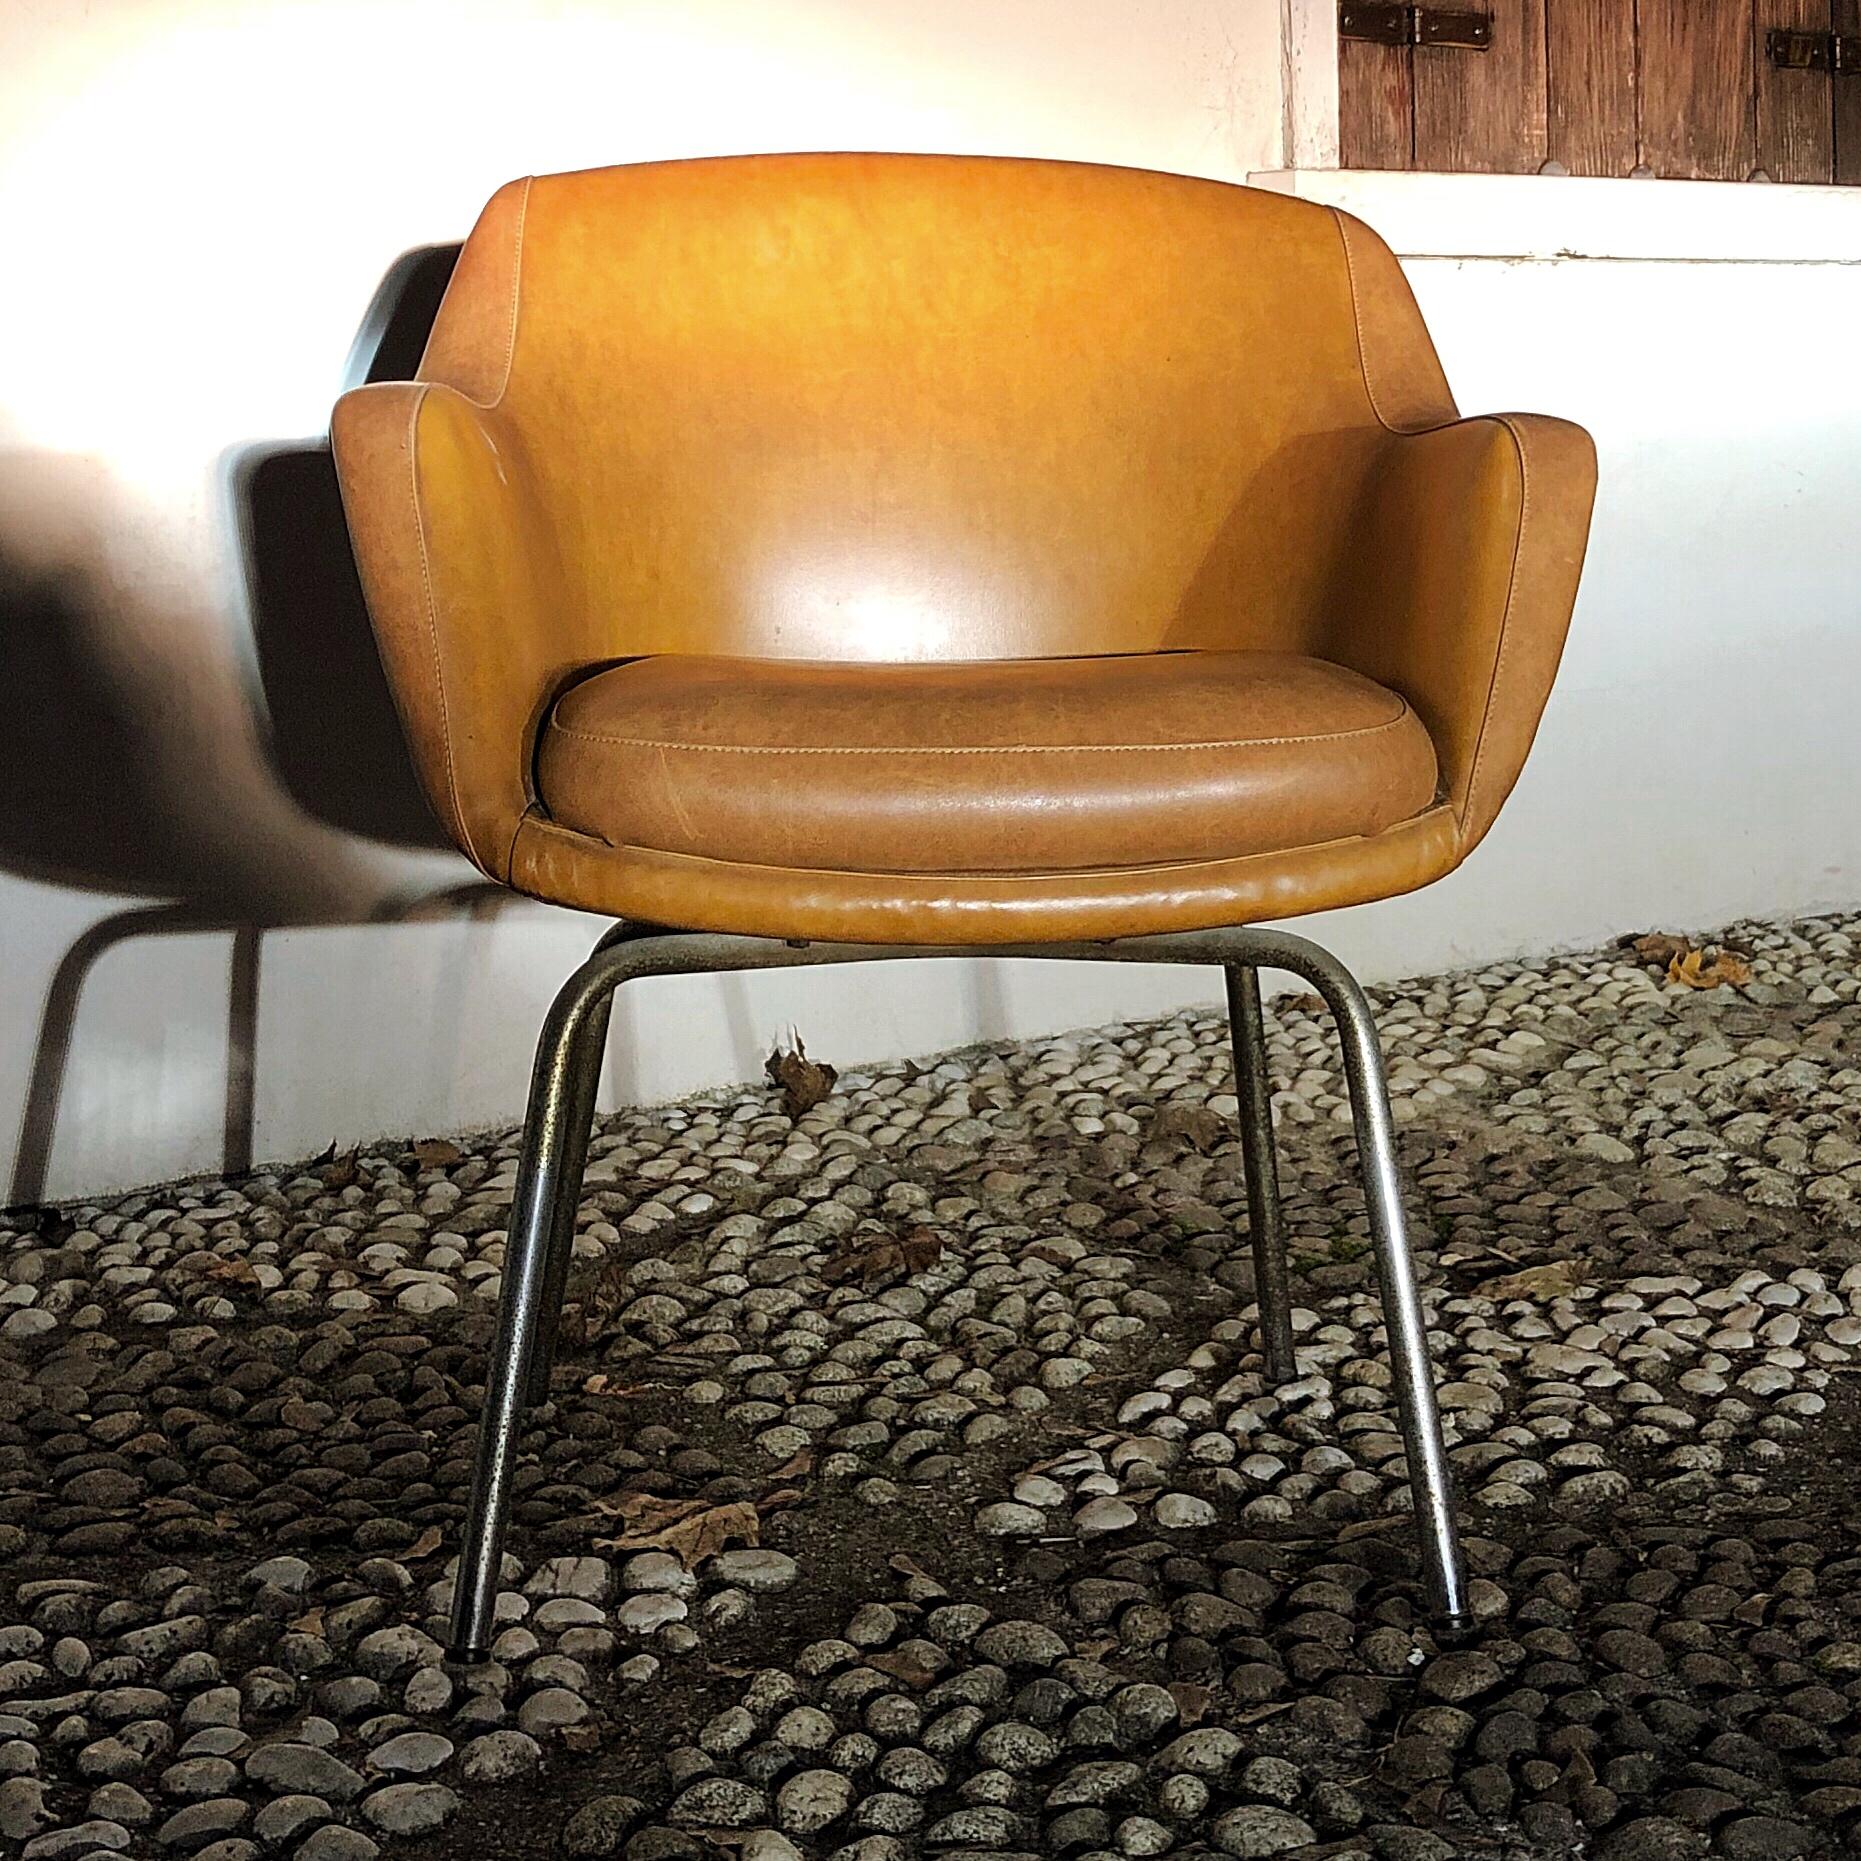 Pair of Midcentury Brown Leather Armchairs in the Style of Arne Jacobsen, 1960s For Sale 9